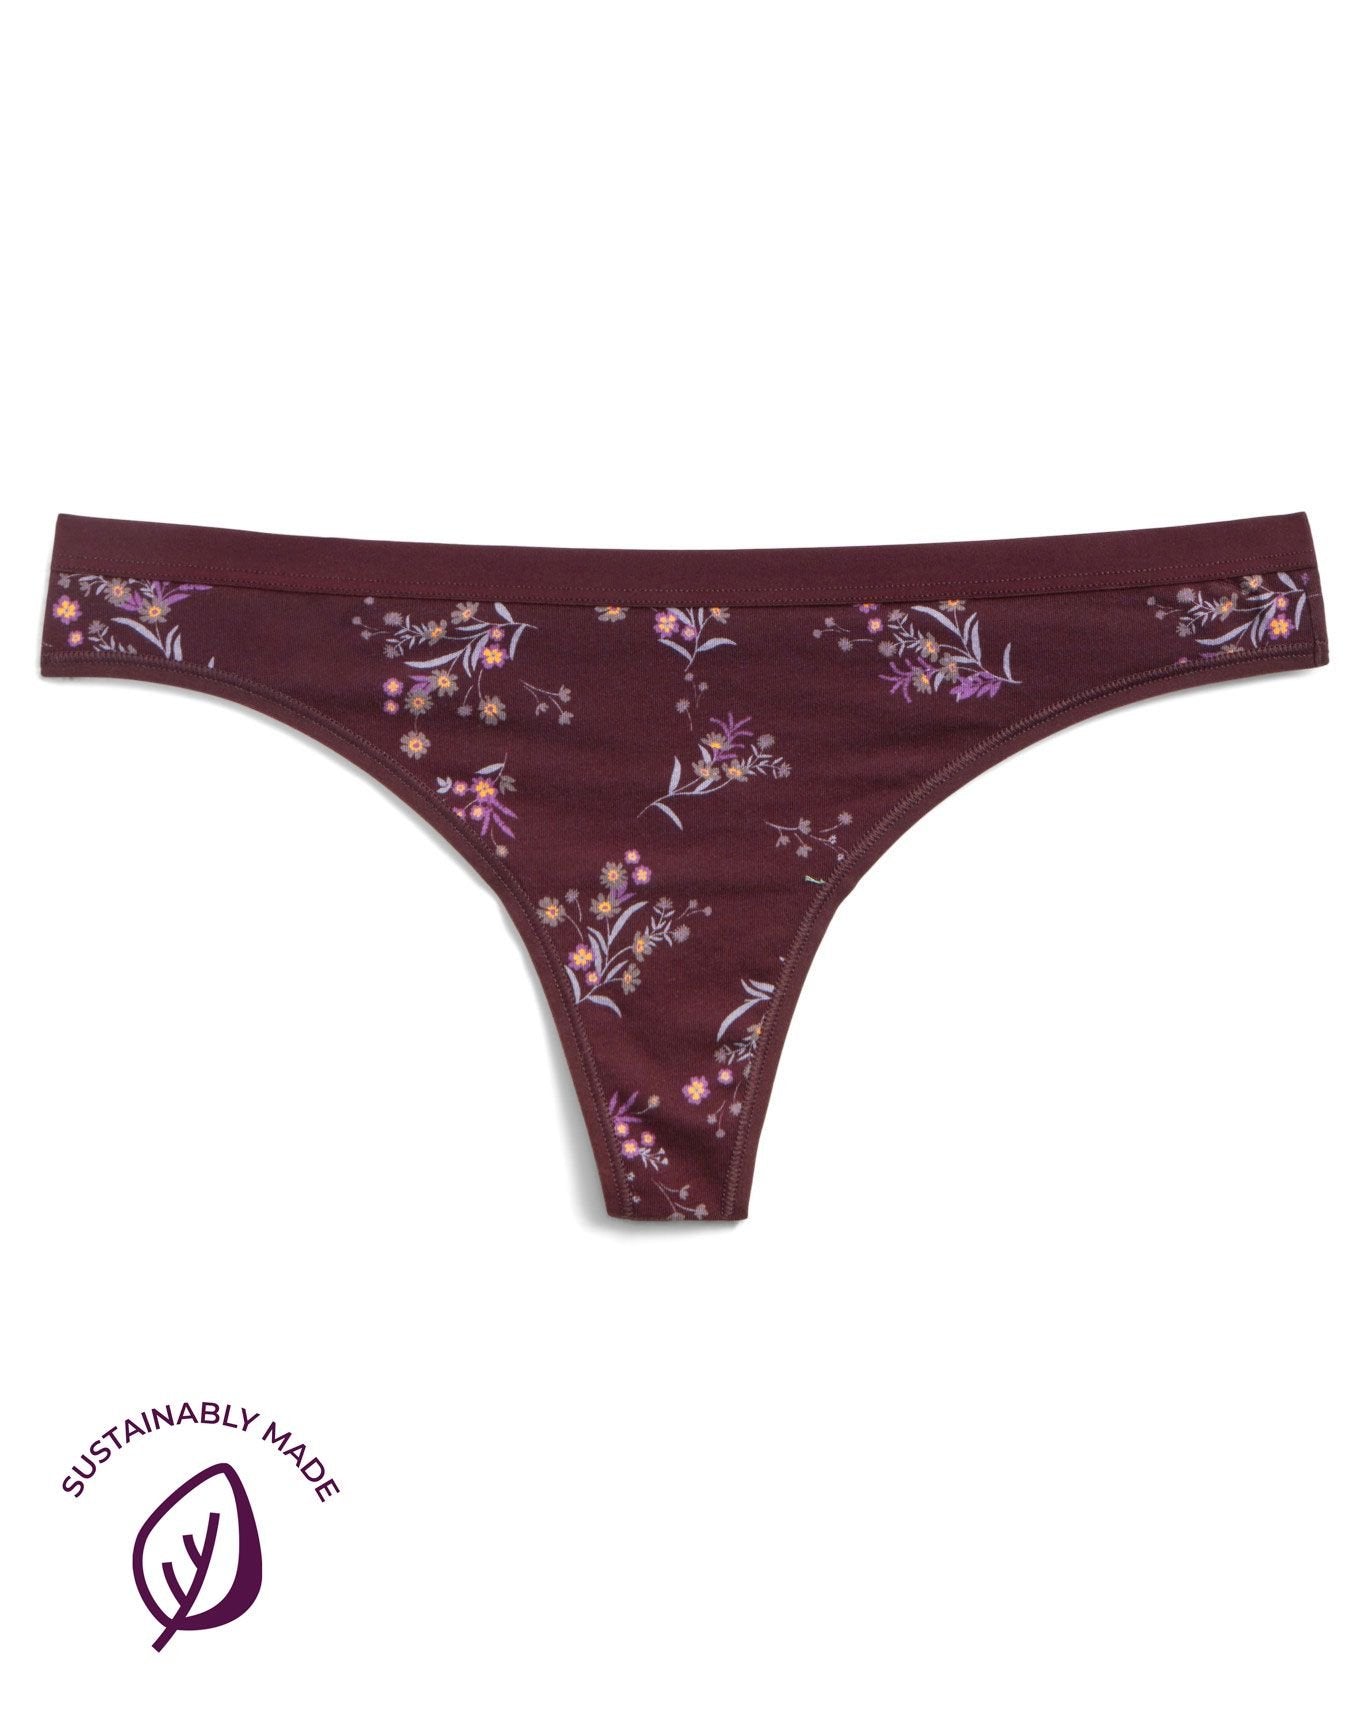 Adore Me Clare Cotton Thong in color Wistful Petals C02 and shape thong